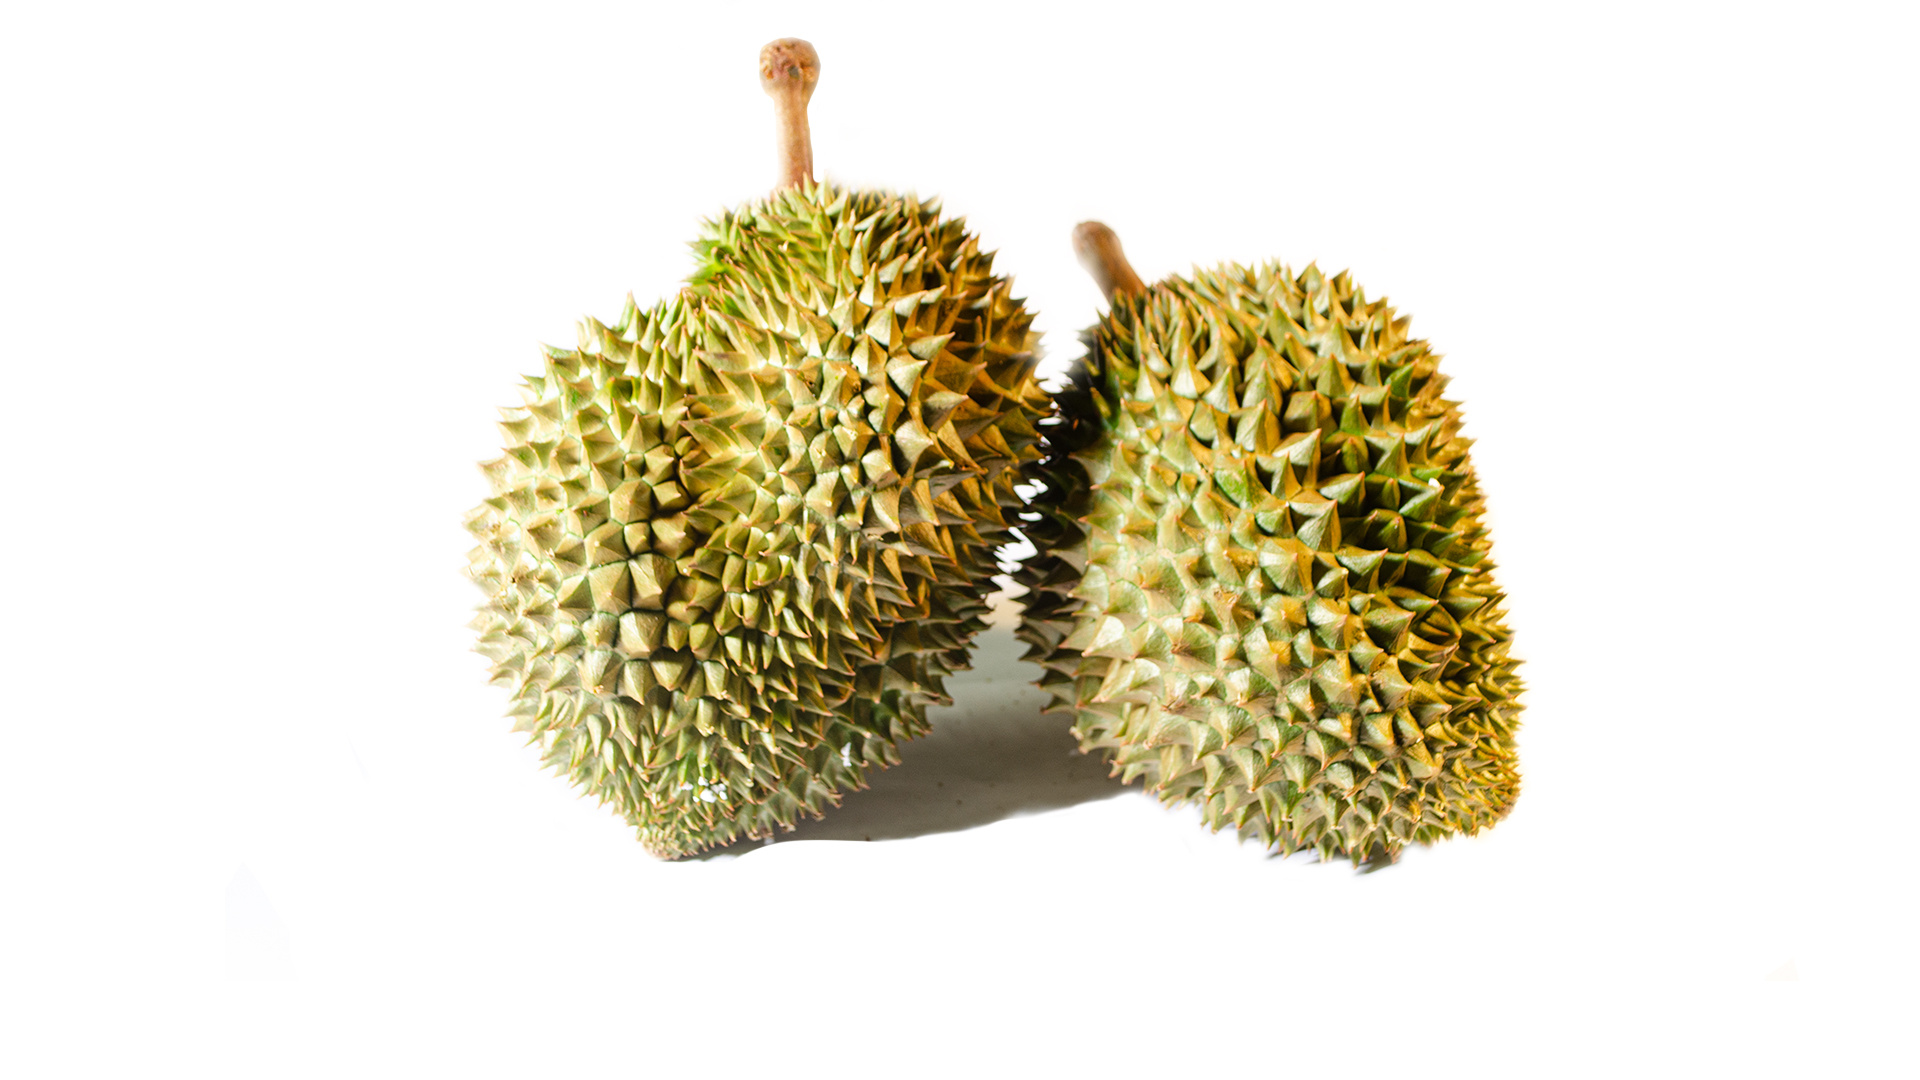 Durian: Strong odor and unique flavor can be overpowering. 1920x1080 Full HD Wallpaper.